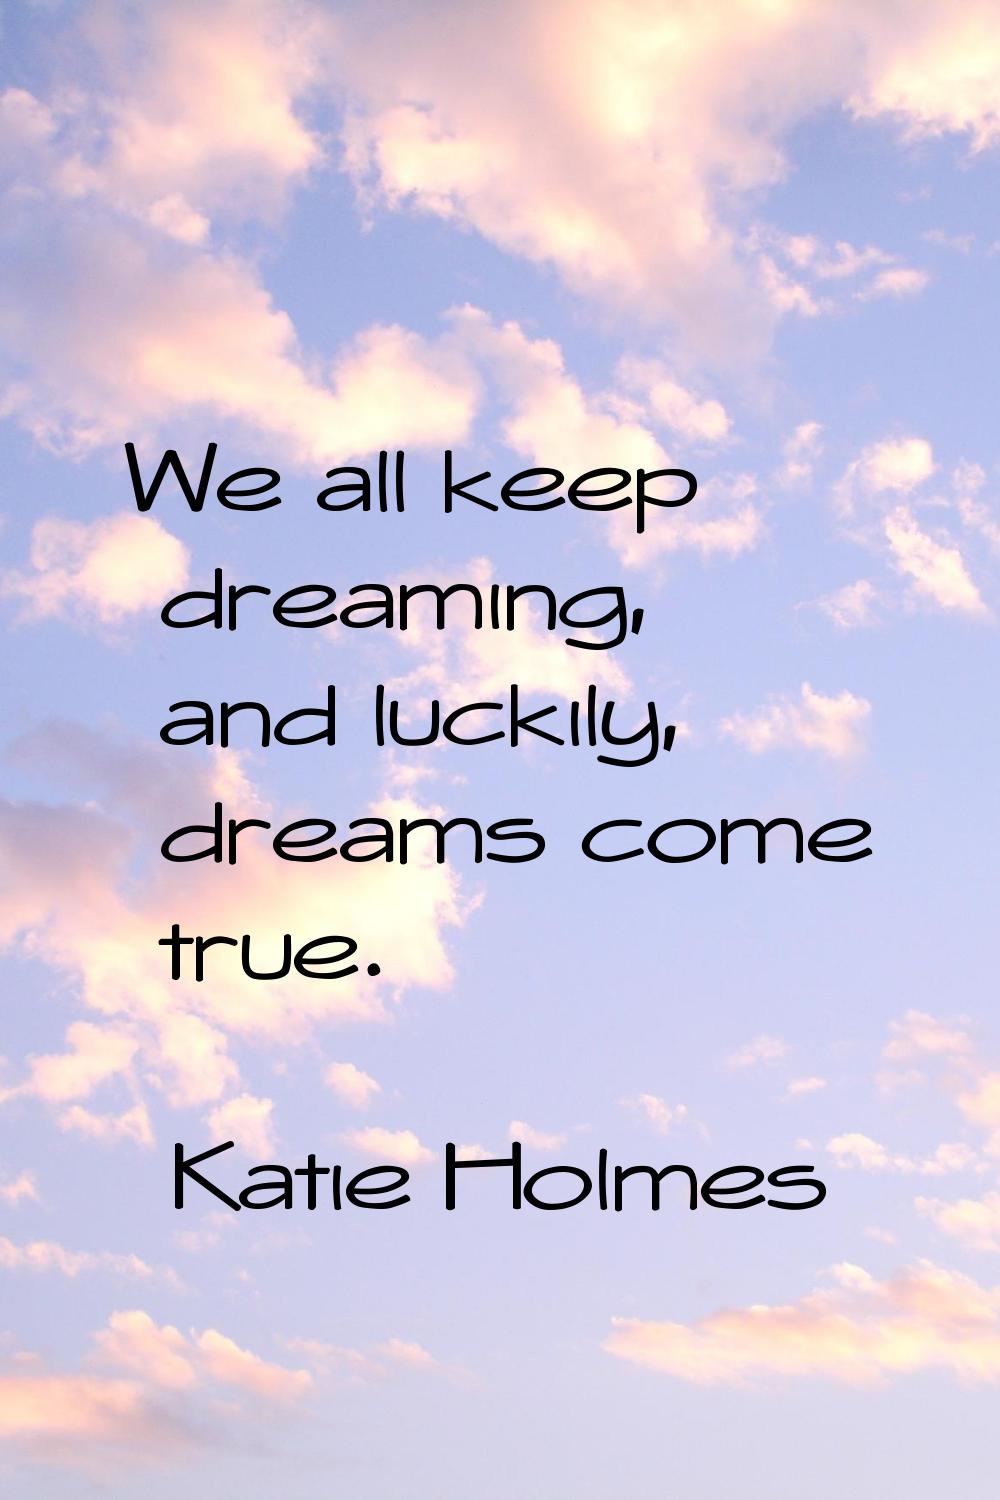 We all keep dreaming, and luckily, dreams come true.